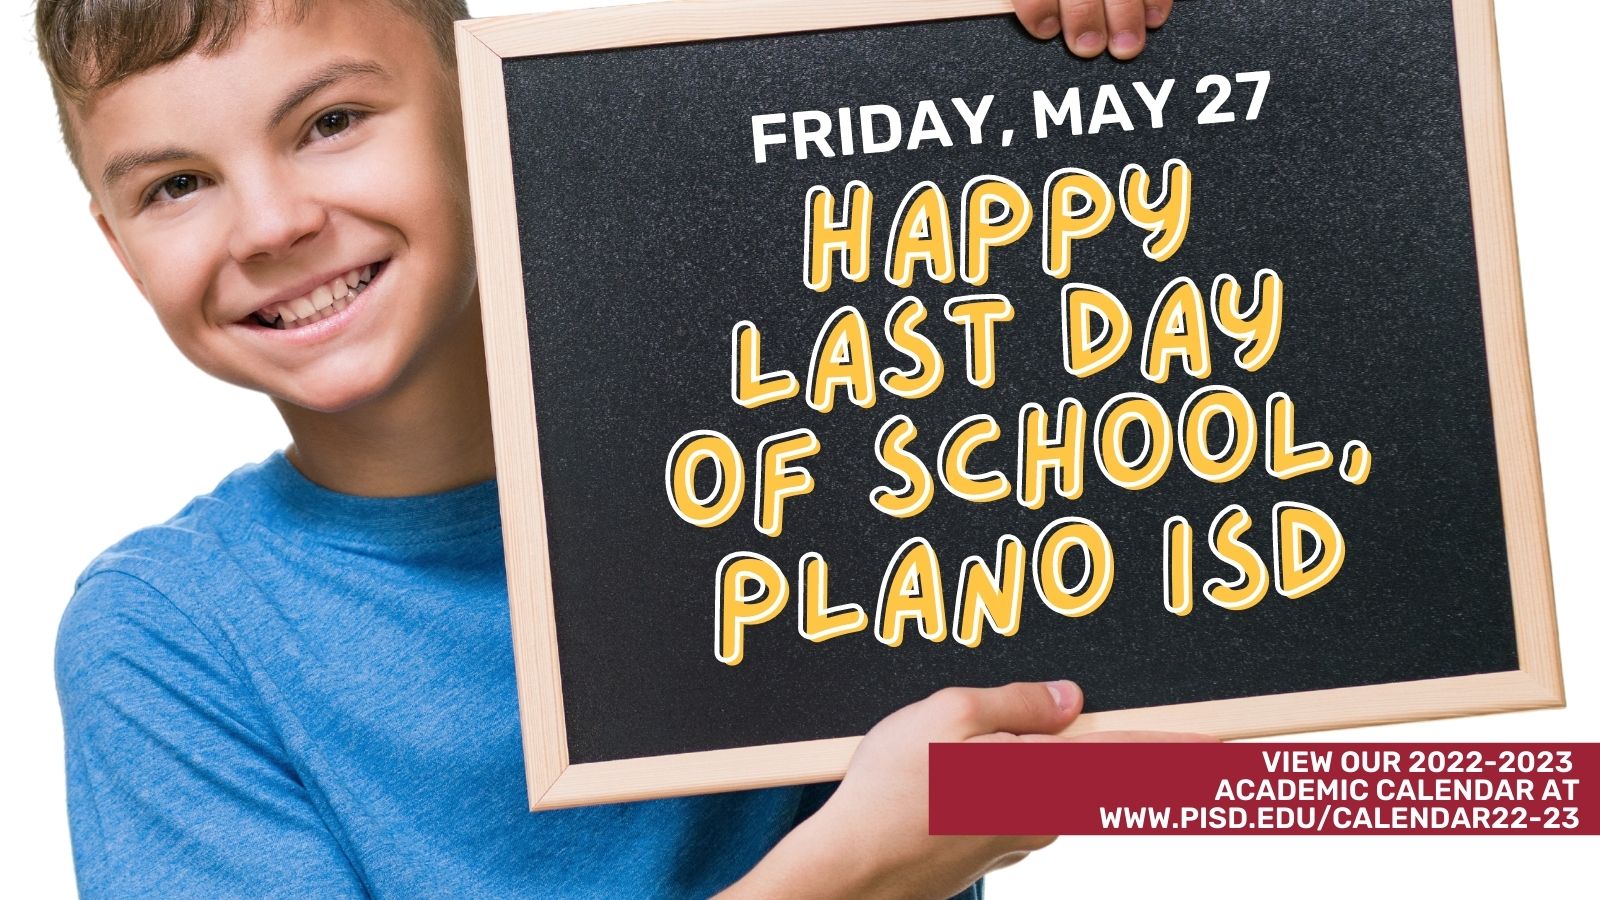 Plano ISD on Twitter "Plano ISD’s last day of school is on Friday, May